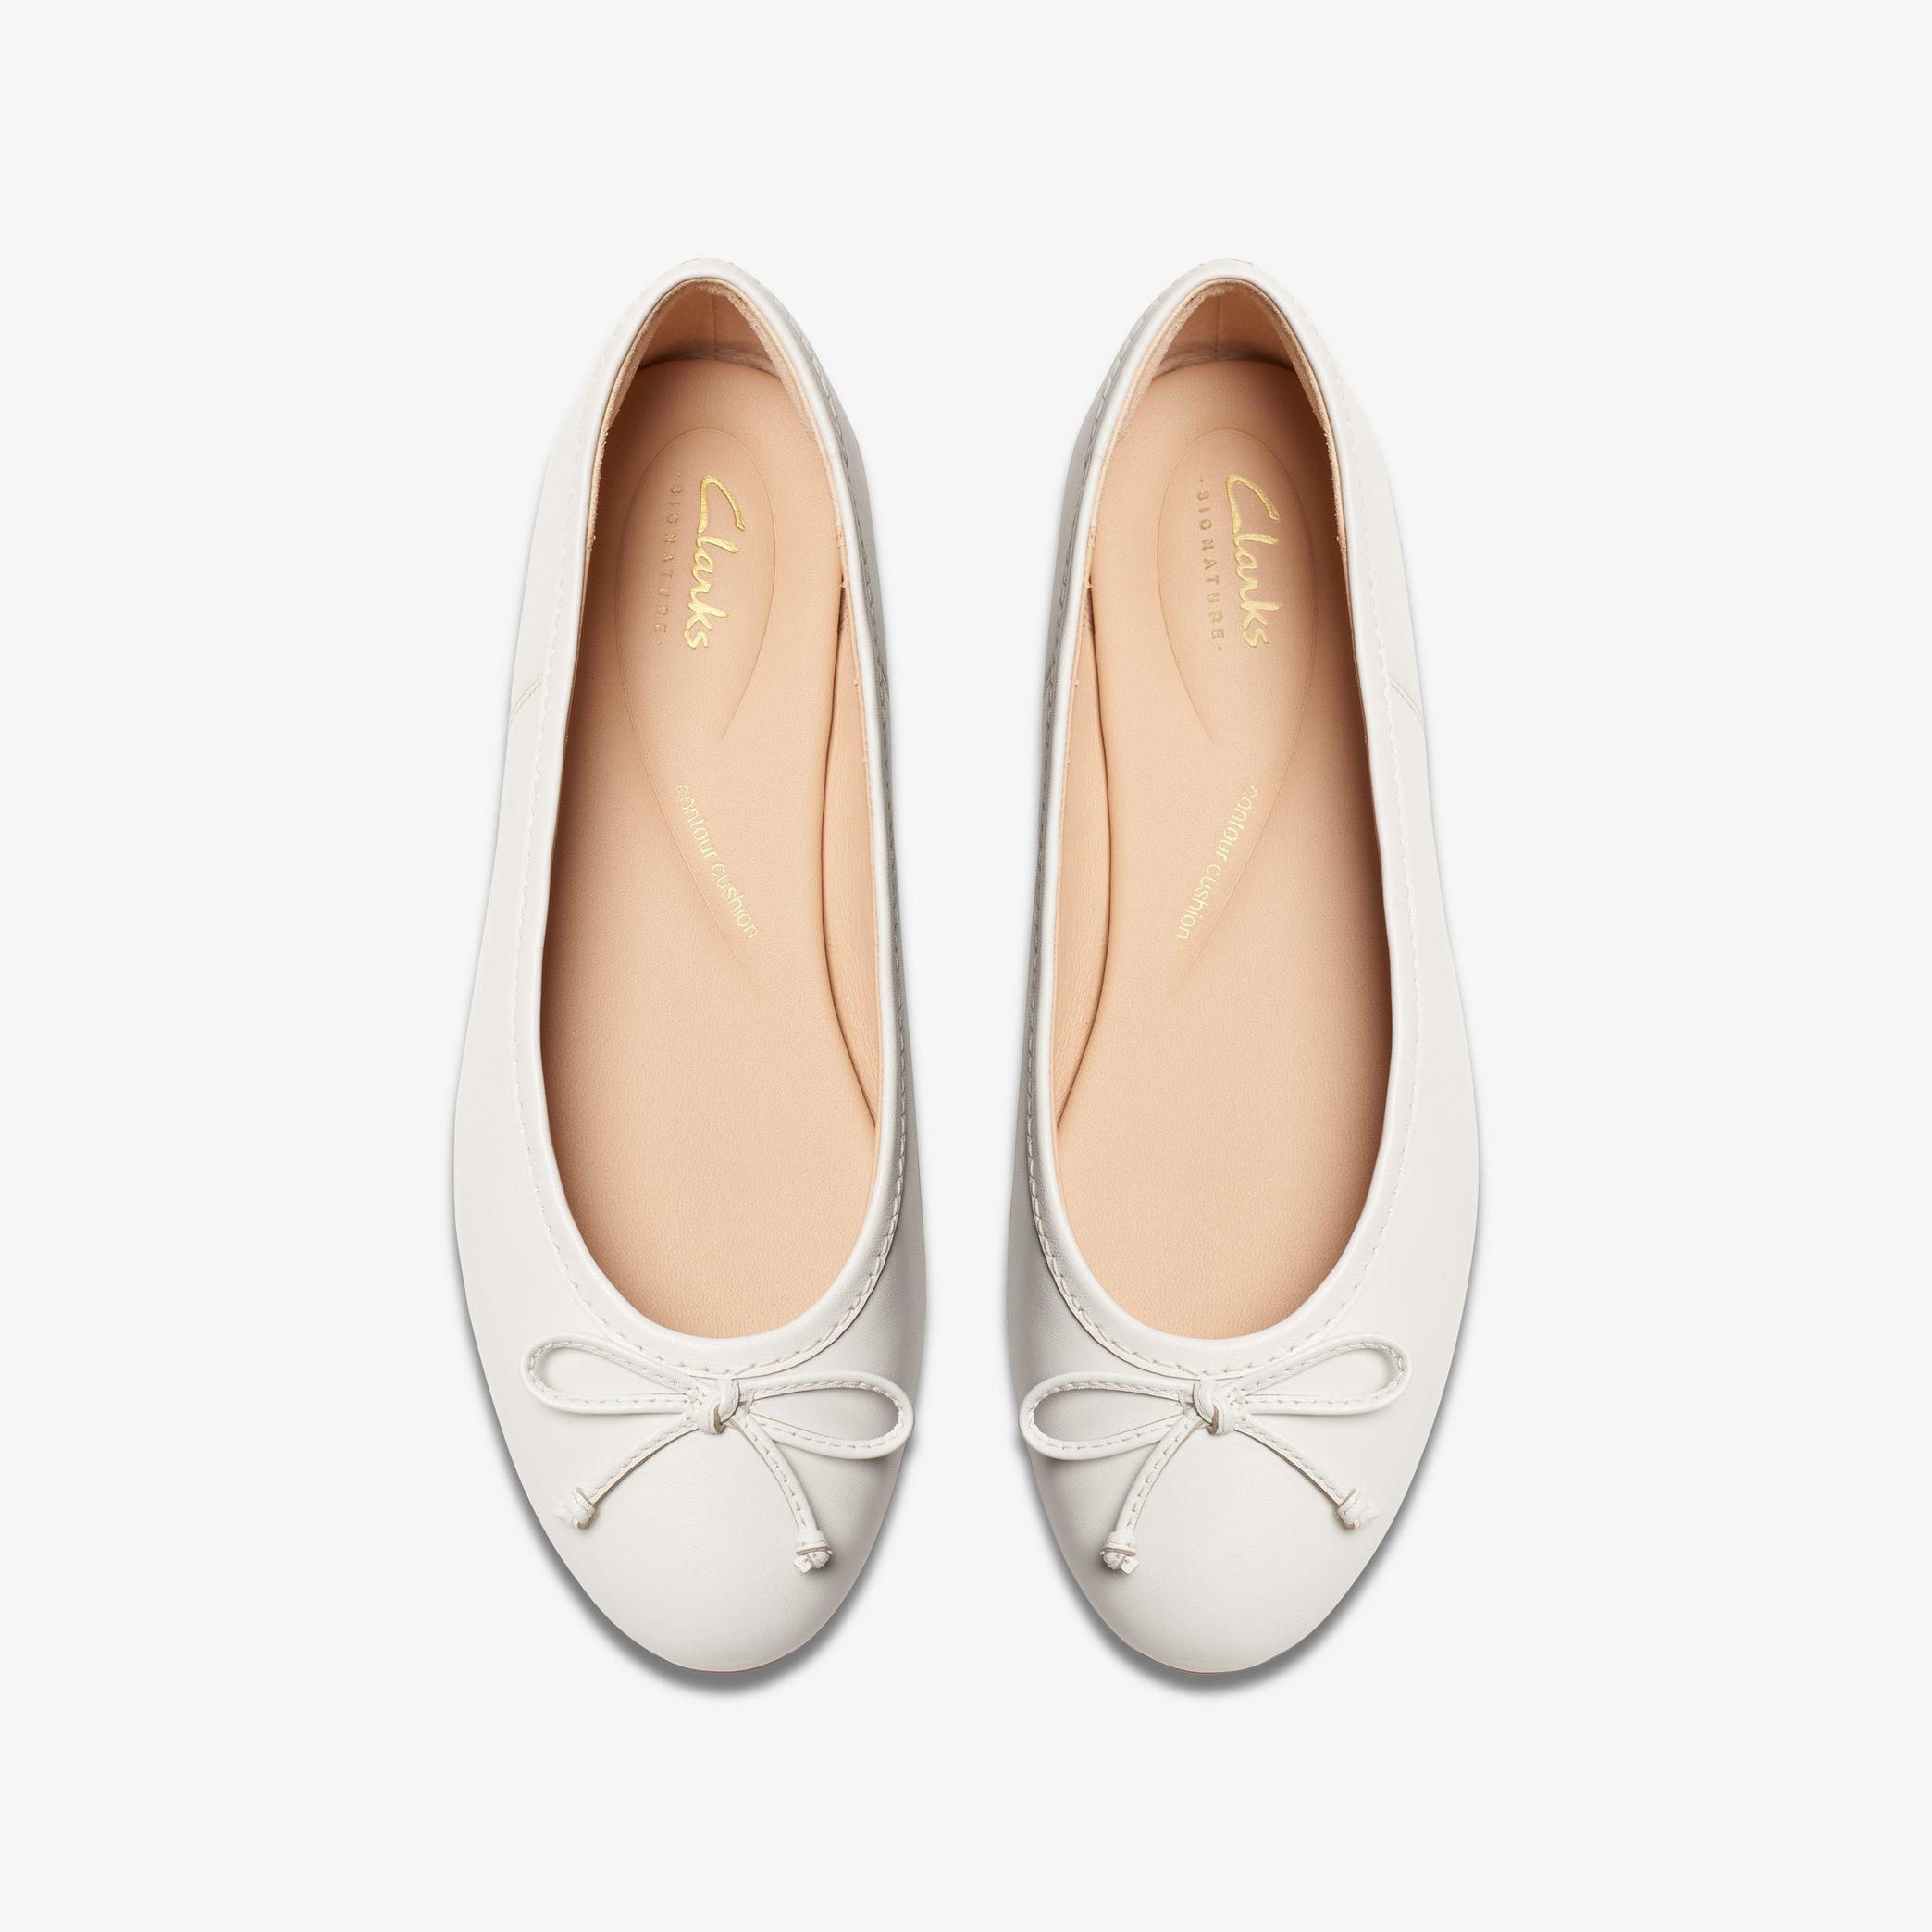 FAWNA LILY White Leather Ballerina, view 9 of 10